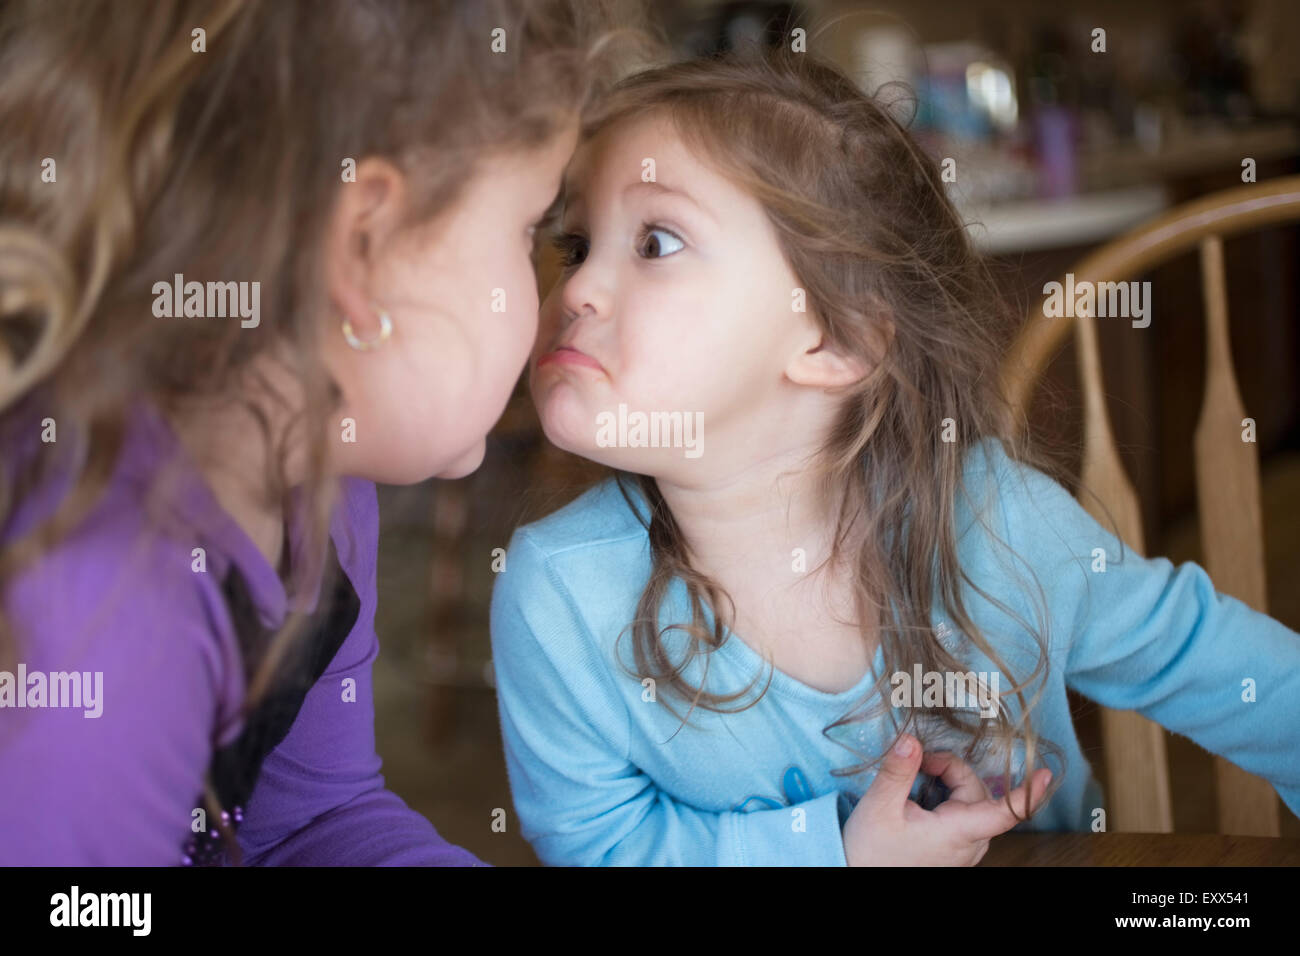 Sisters making faces at each other Stock Photo